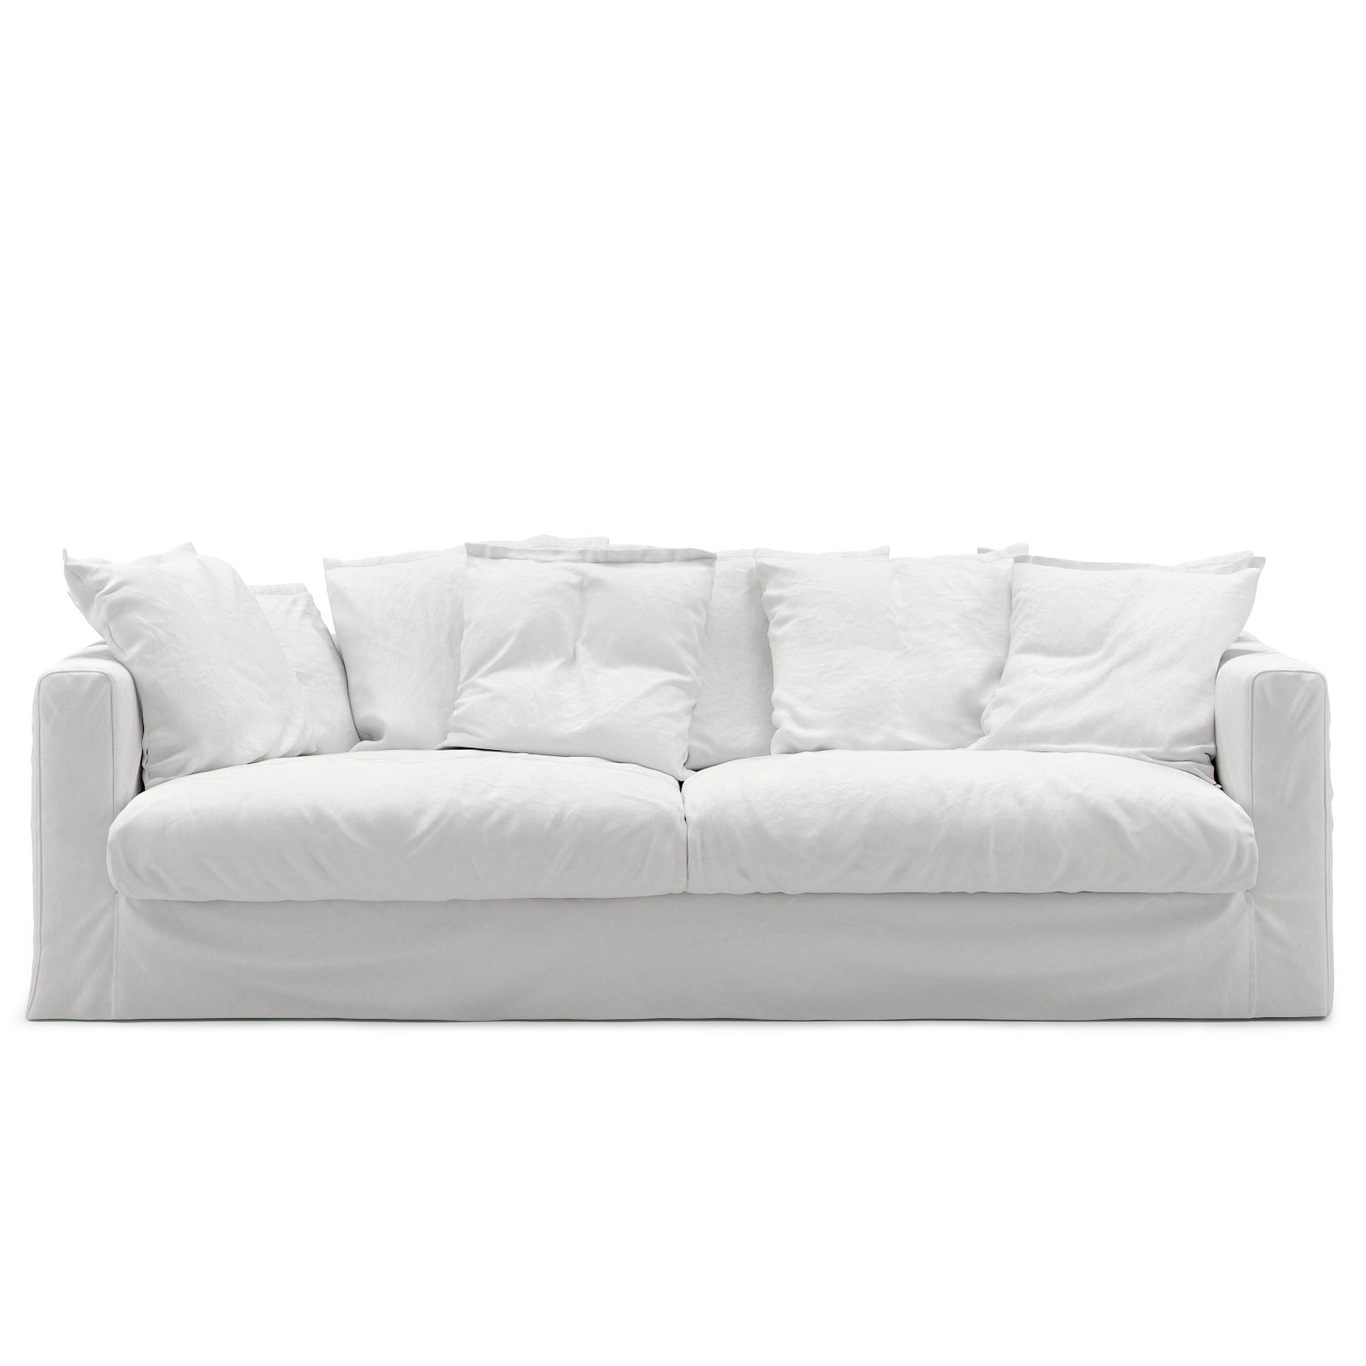 Le Grand Air Upholstery 3-Seater Cotton, White